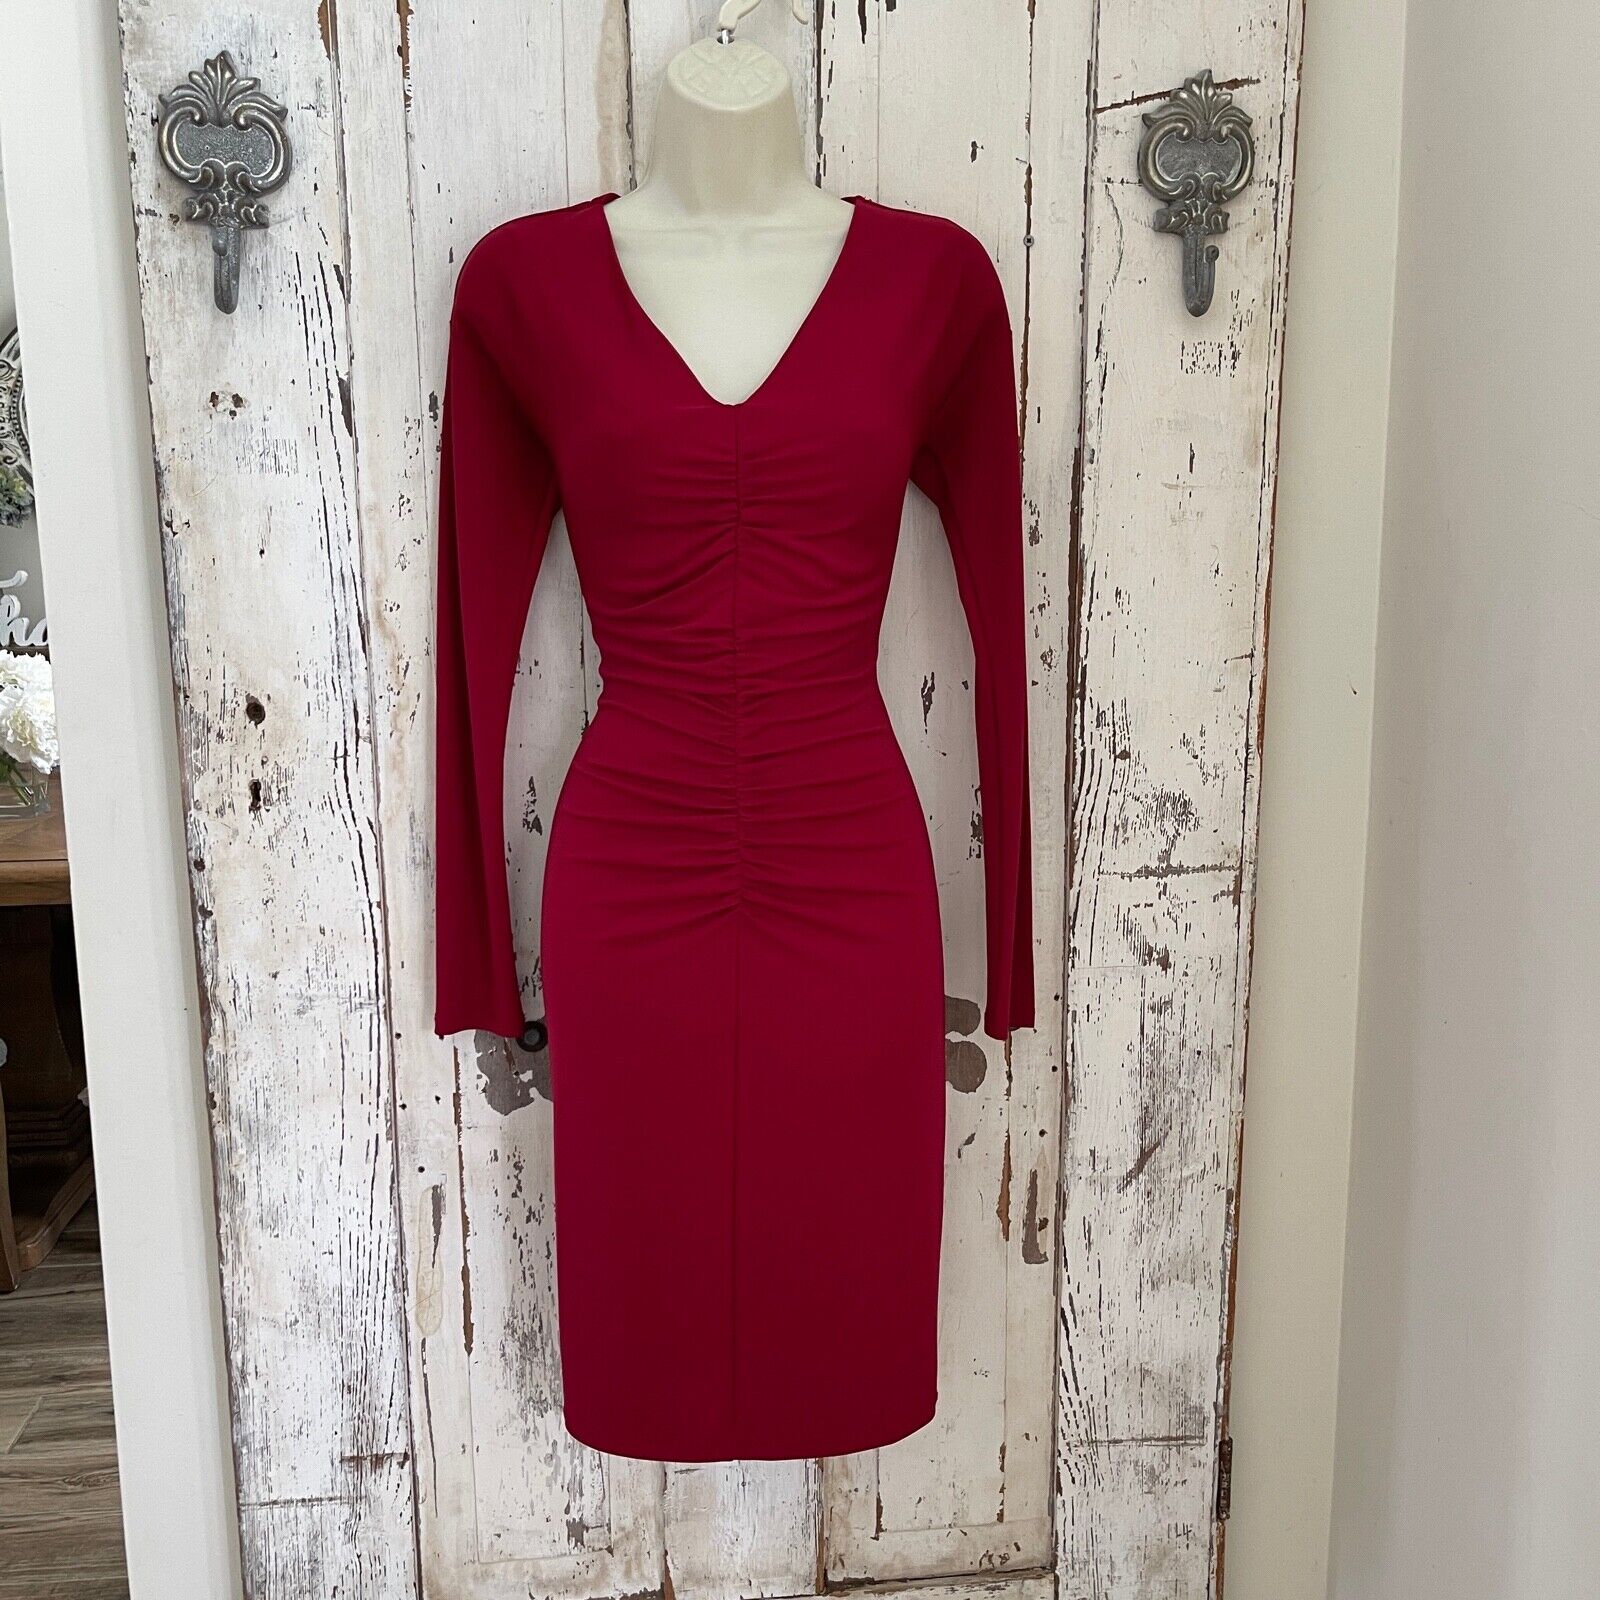 Narciso Rodriguez Size XS Woman\'s Red Sheath Long Sleeve Career Cocktail Dress